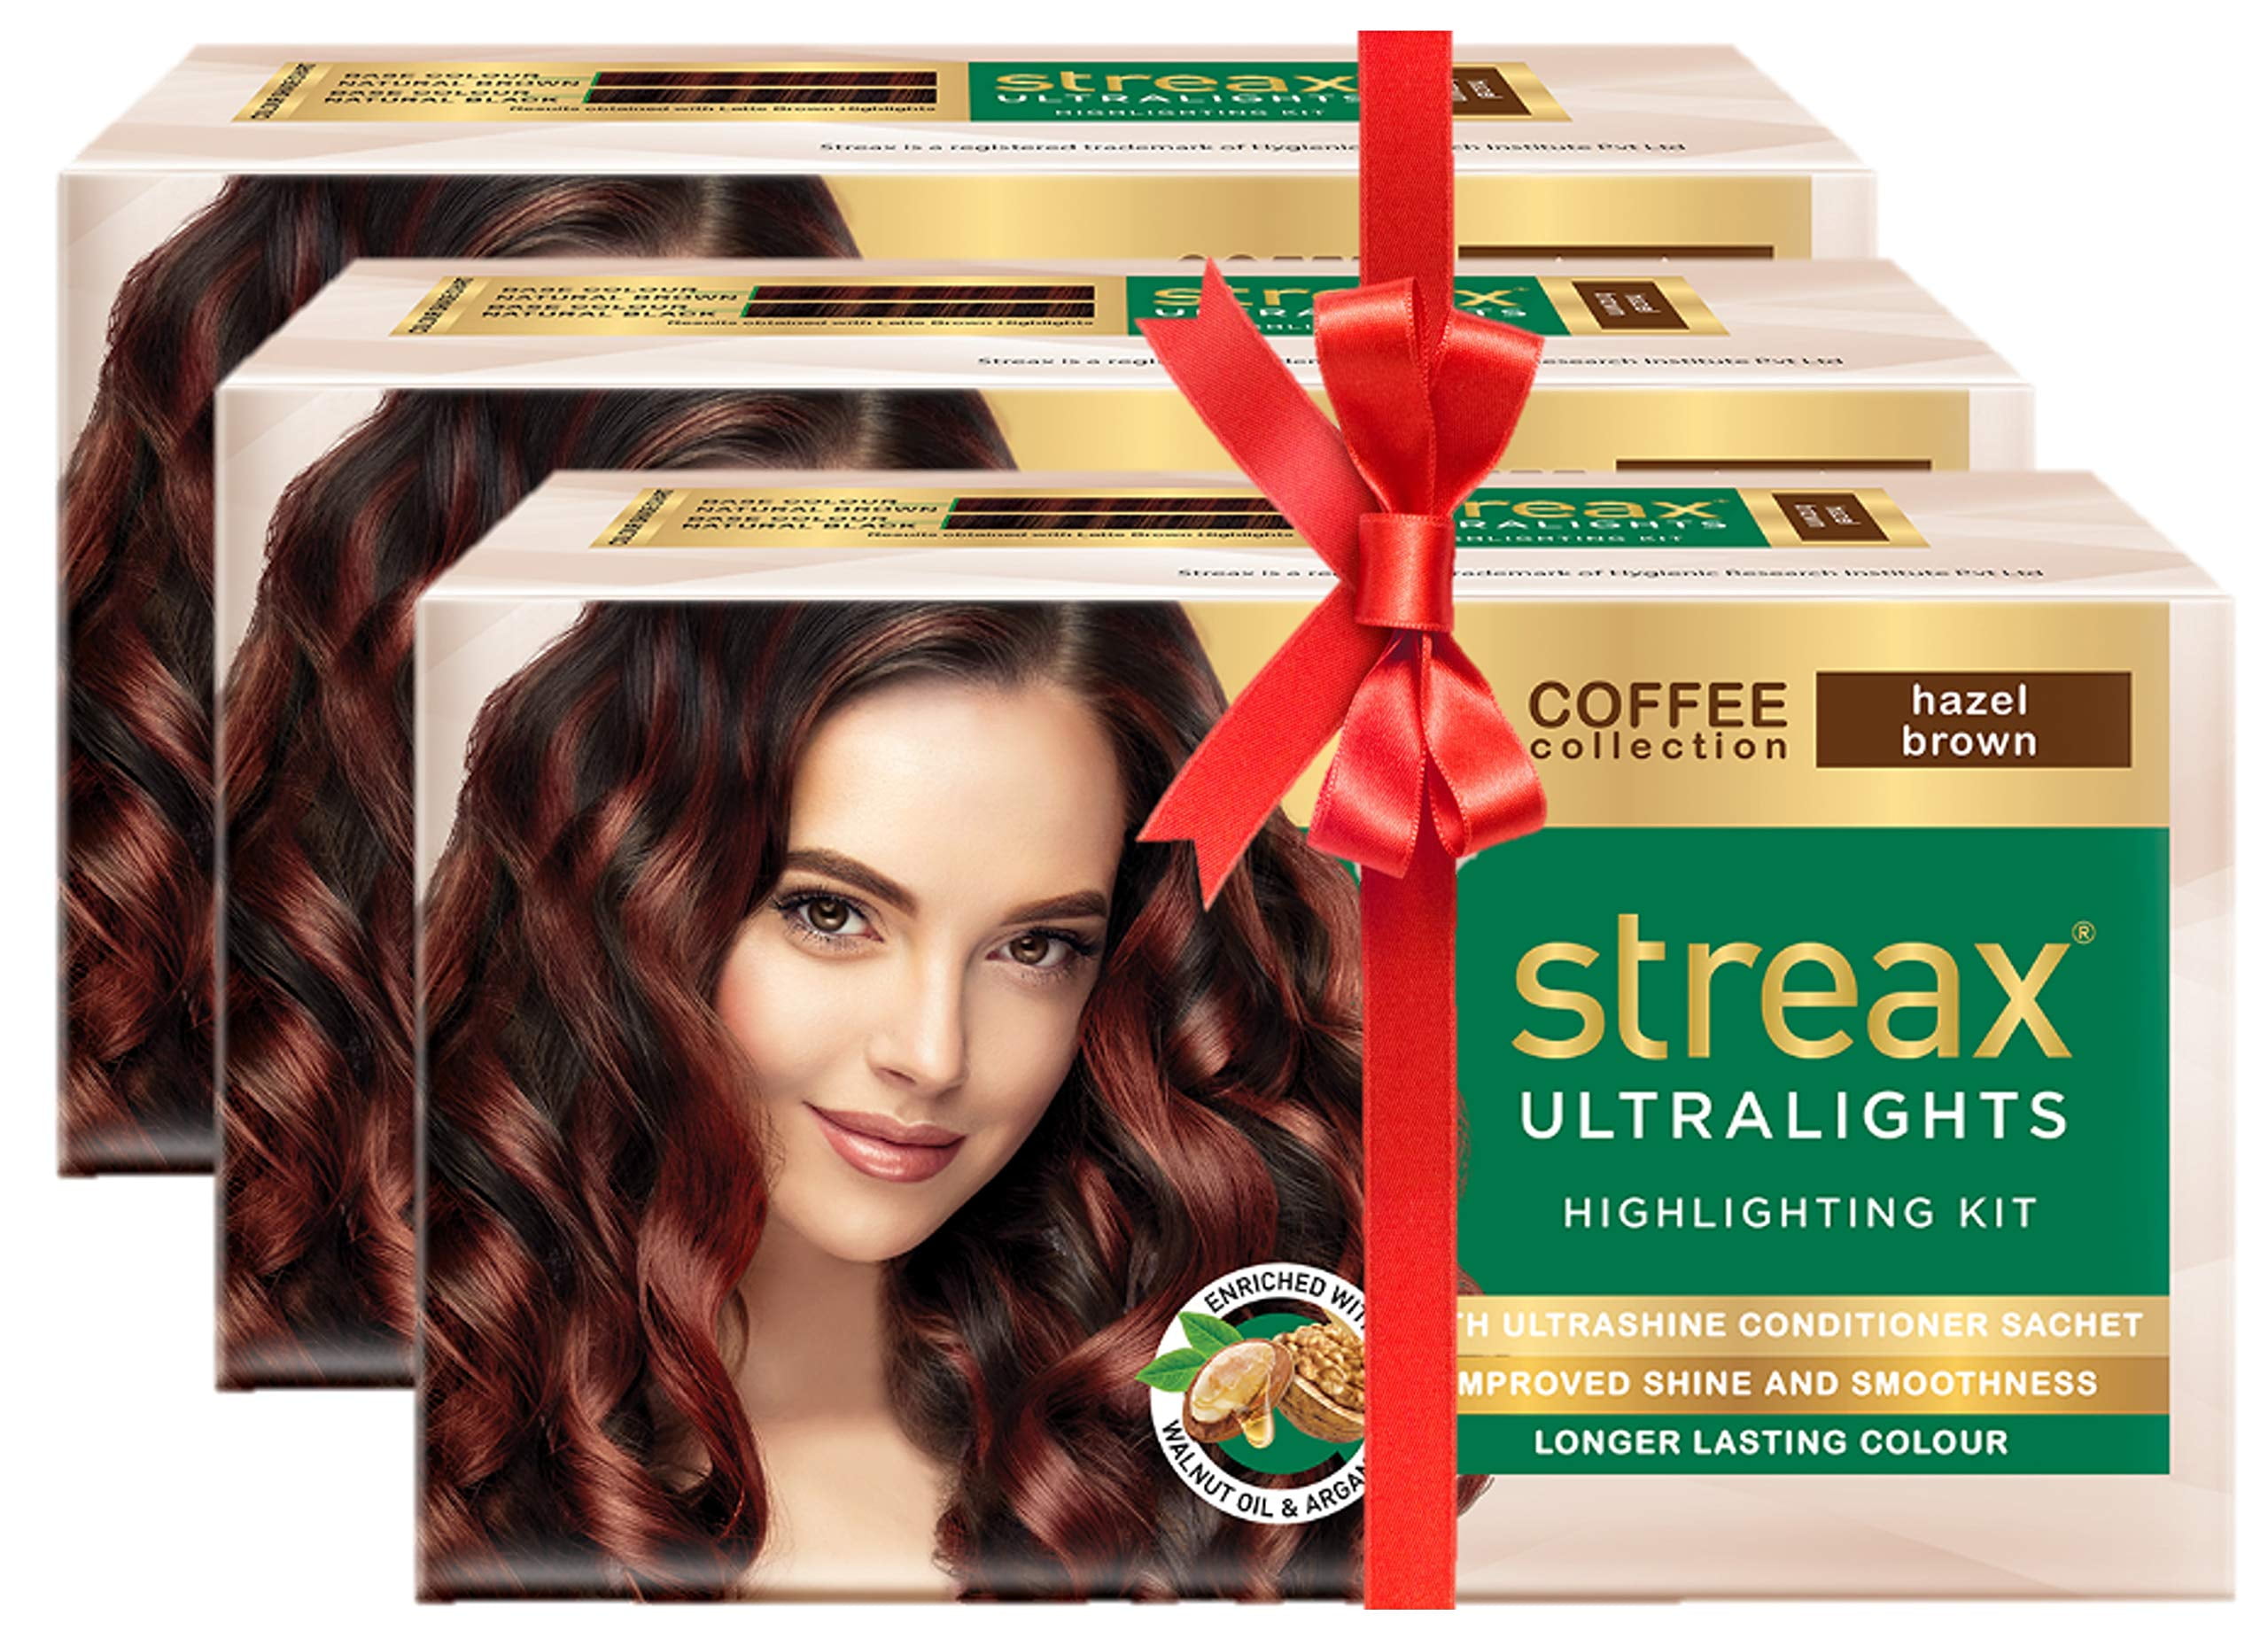 Streax Ultralights Highlighting Kit-Coffee Collection-Cappuccino Brown -  60g (Pack of 3) (Hazel Brown) 